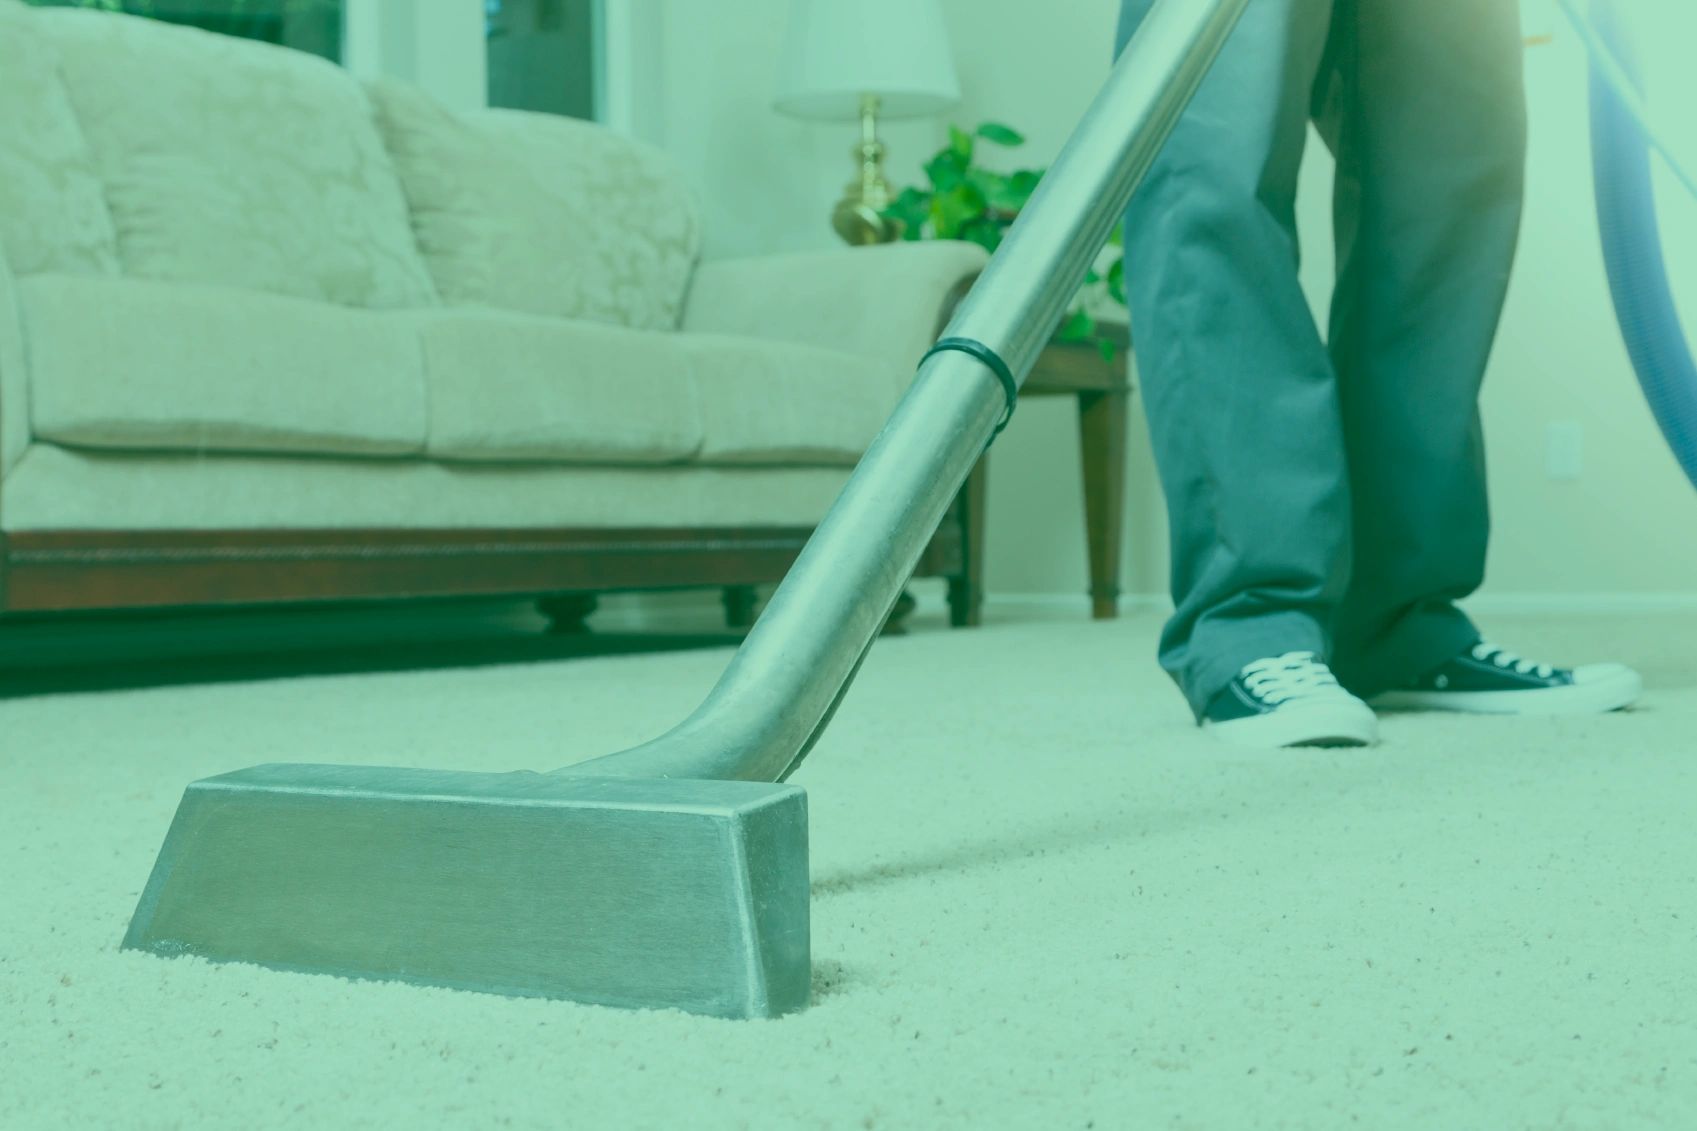 Immaculate Carpet Cleaning Services